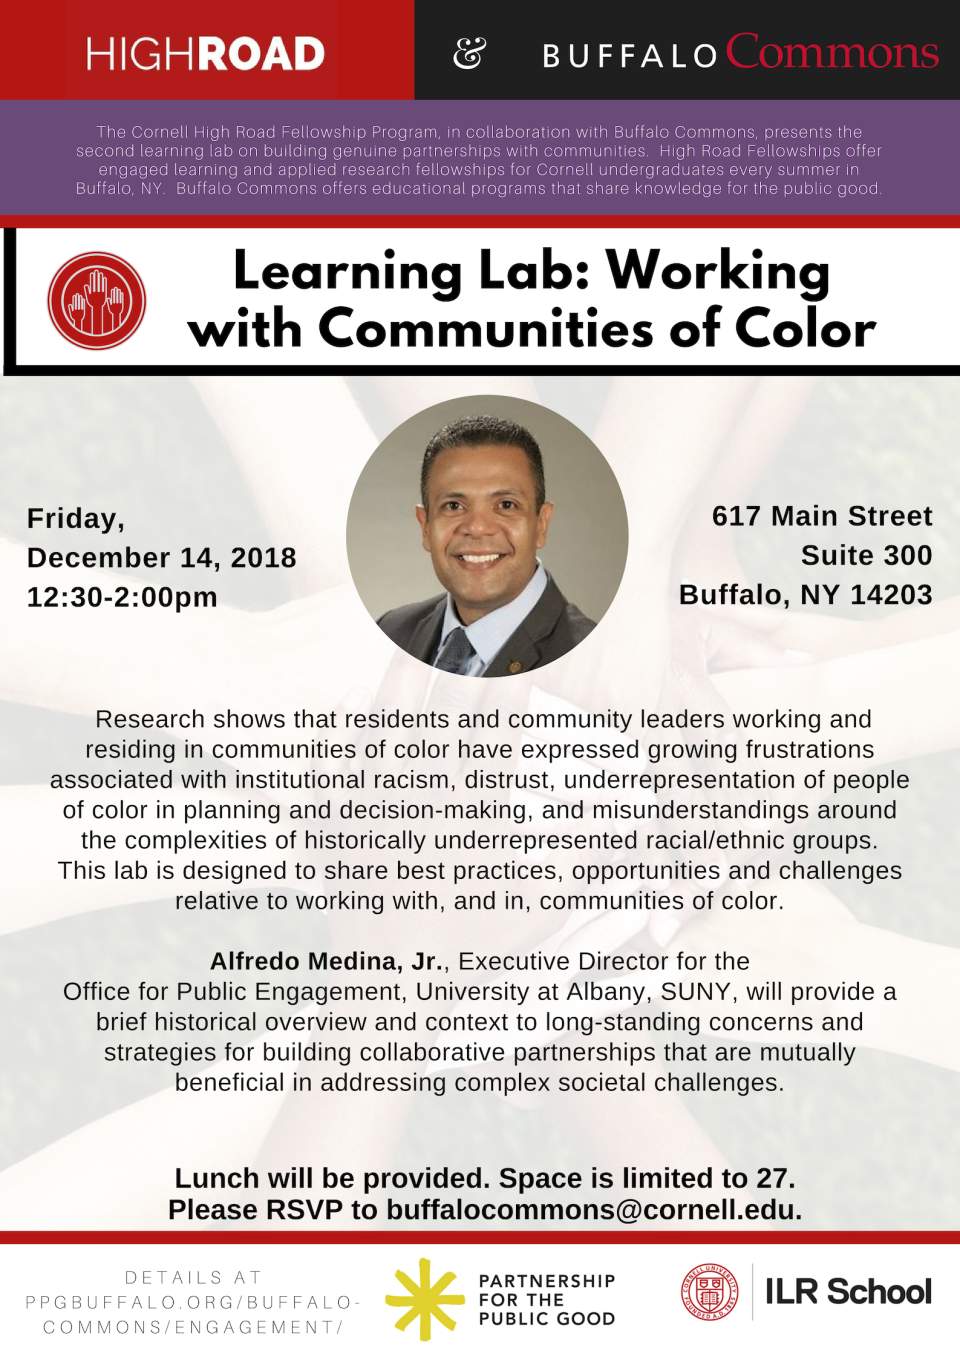 Learning Lab: Working with Communities of Color